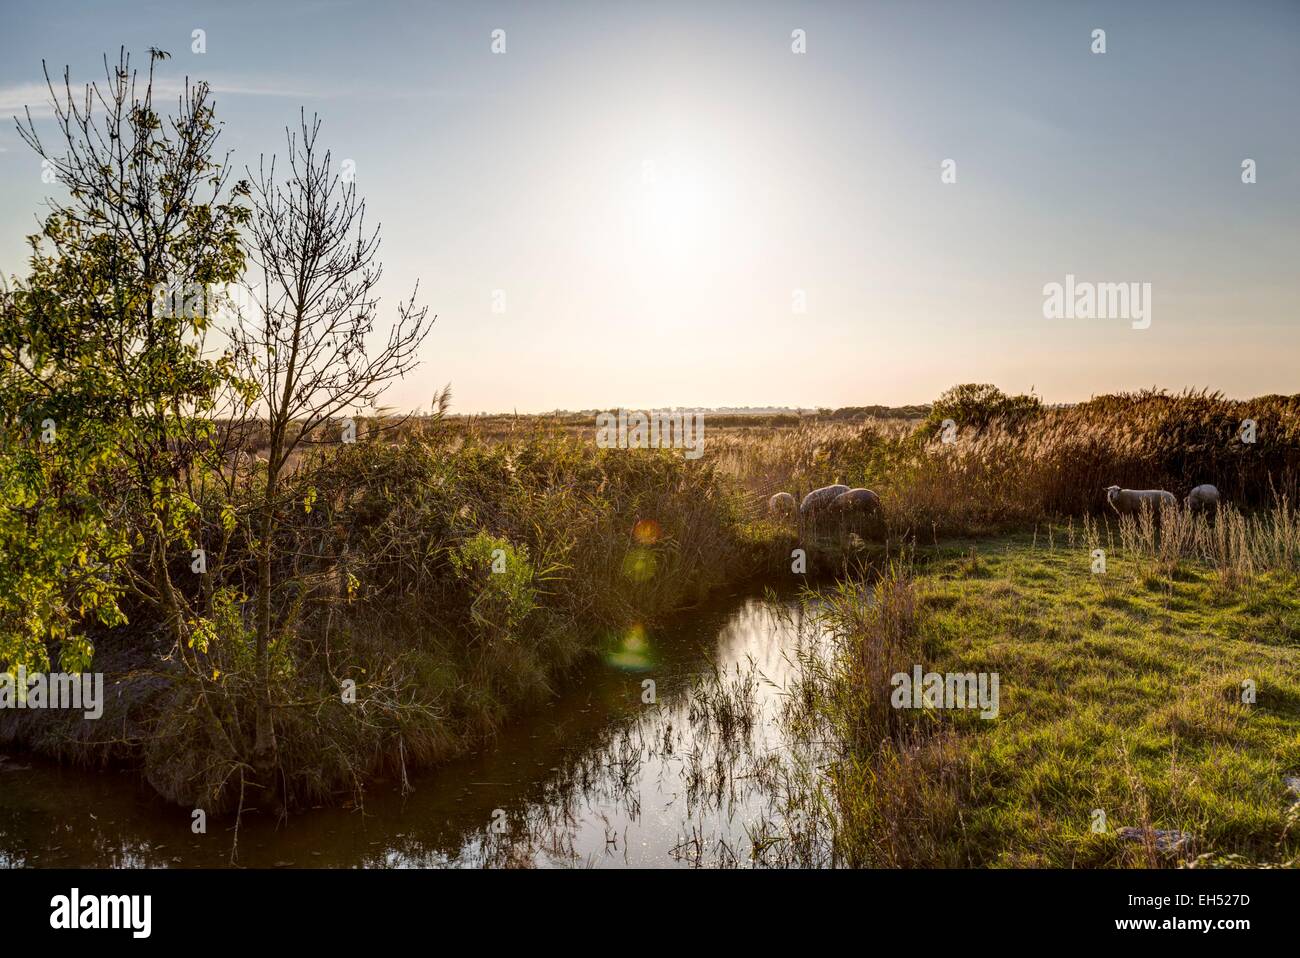 France, Gironde, Anglade, landscape around the village Stock Photo